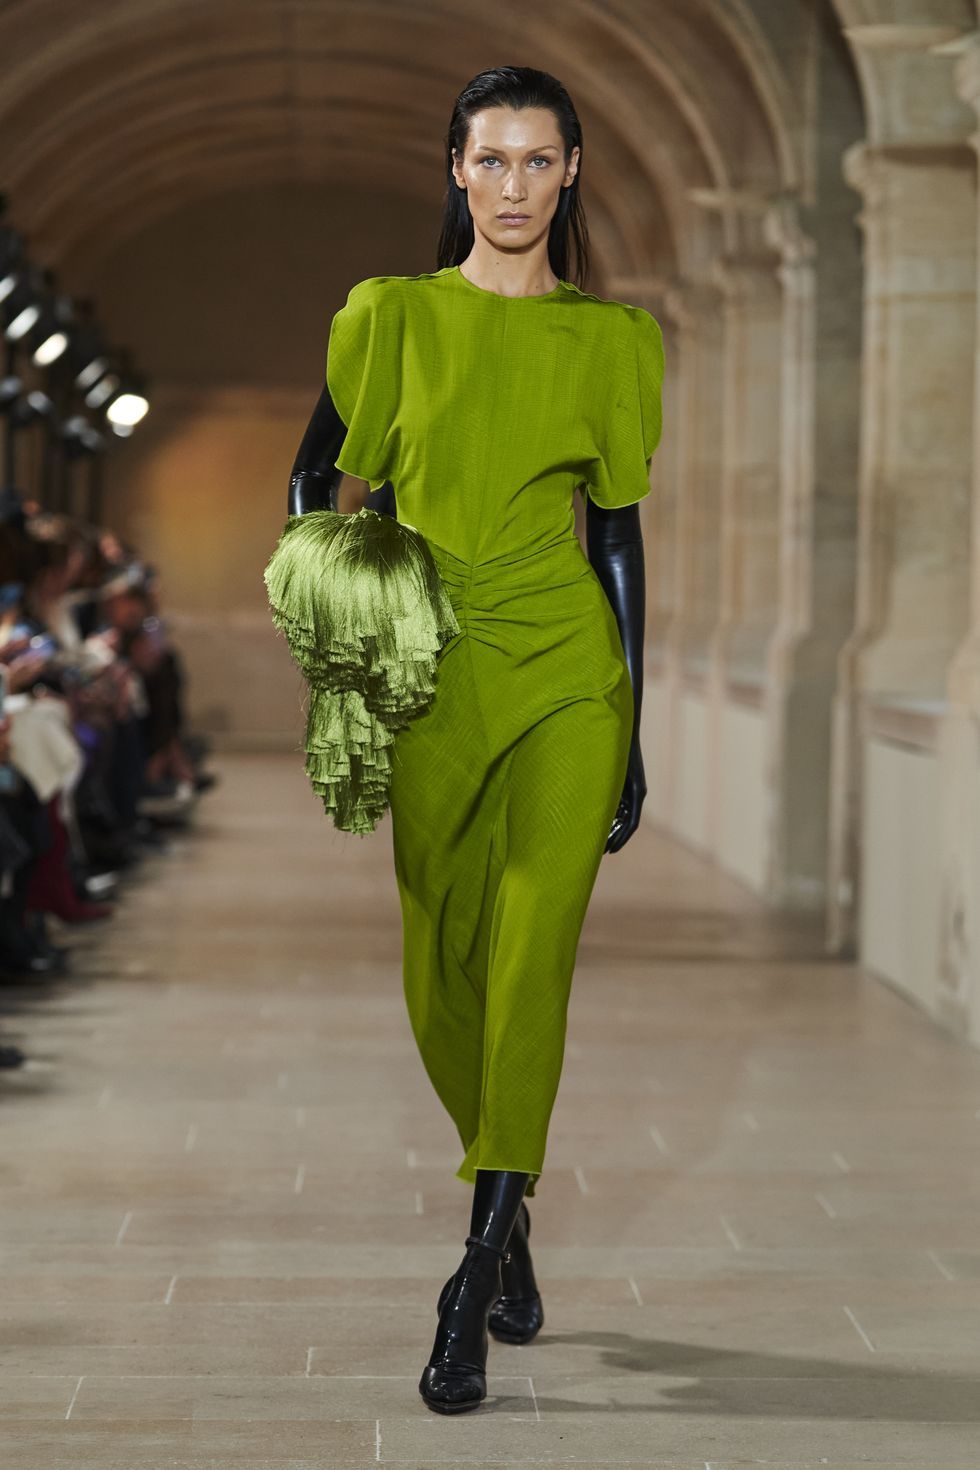 13 Best Lime Green Dress Outfit Ideas: Ultimate Style Guide